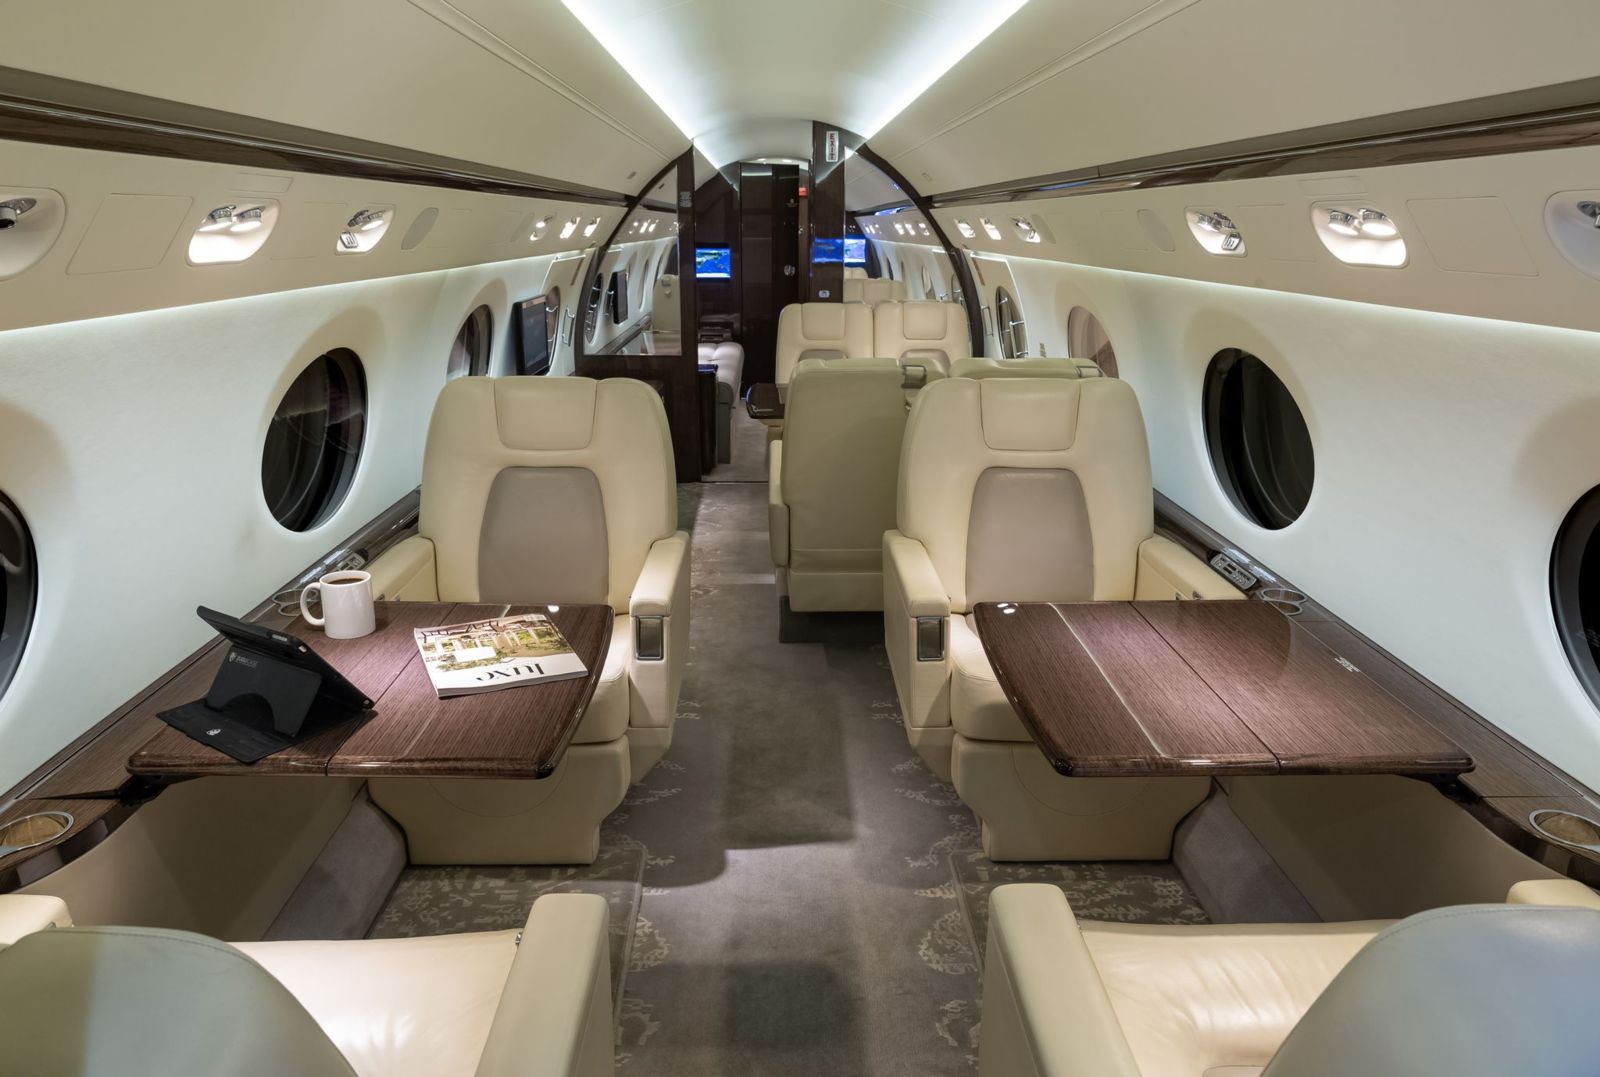 Gulfstream G550  S/N 5354 for sale | gallery image: /userfiles/files/f%20-%20a%20-%205354.jpeg